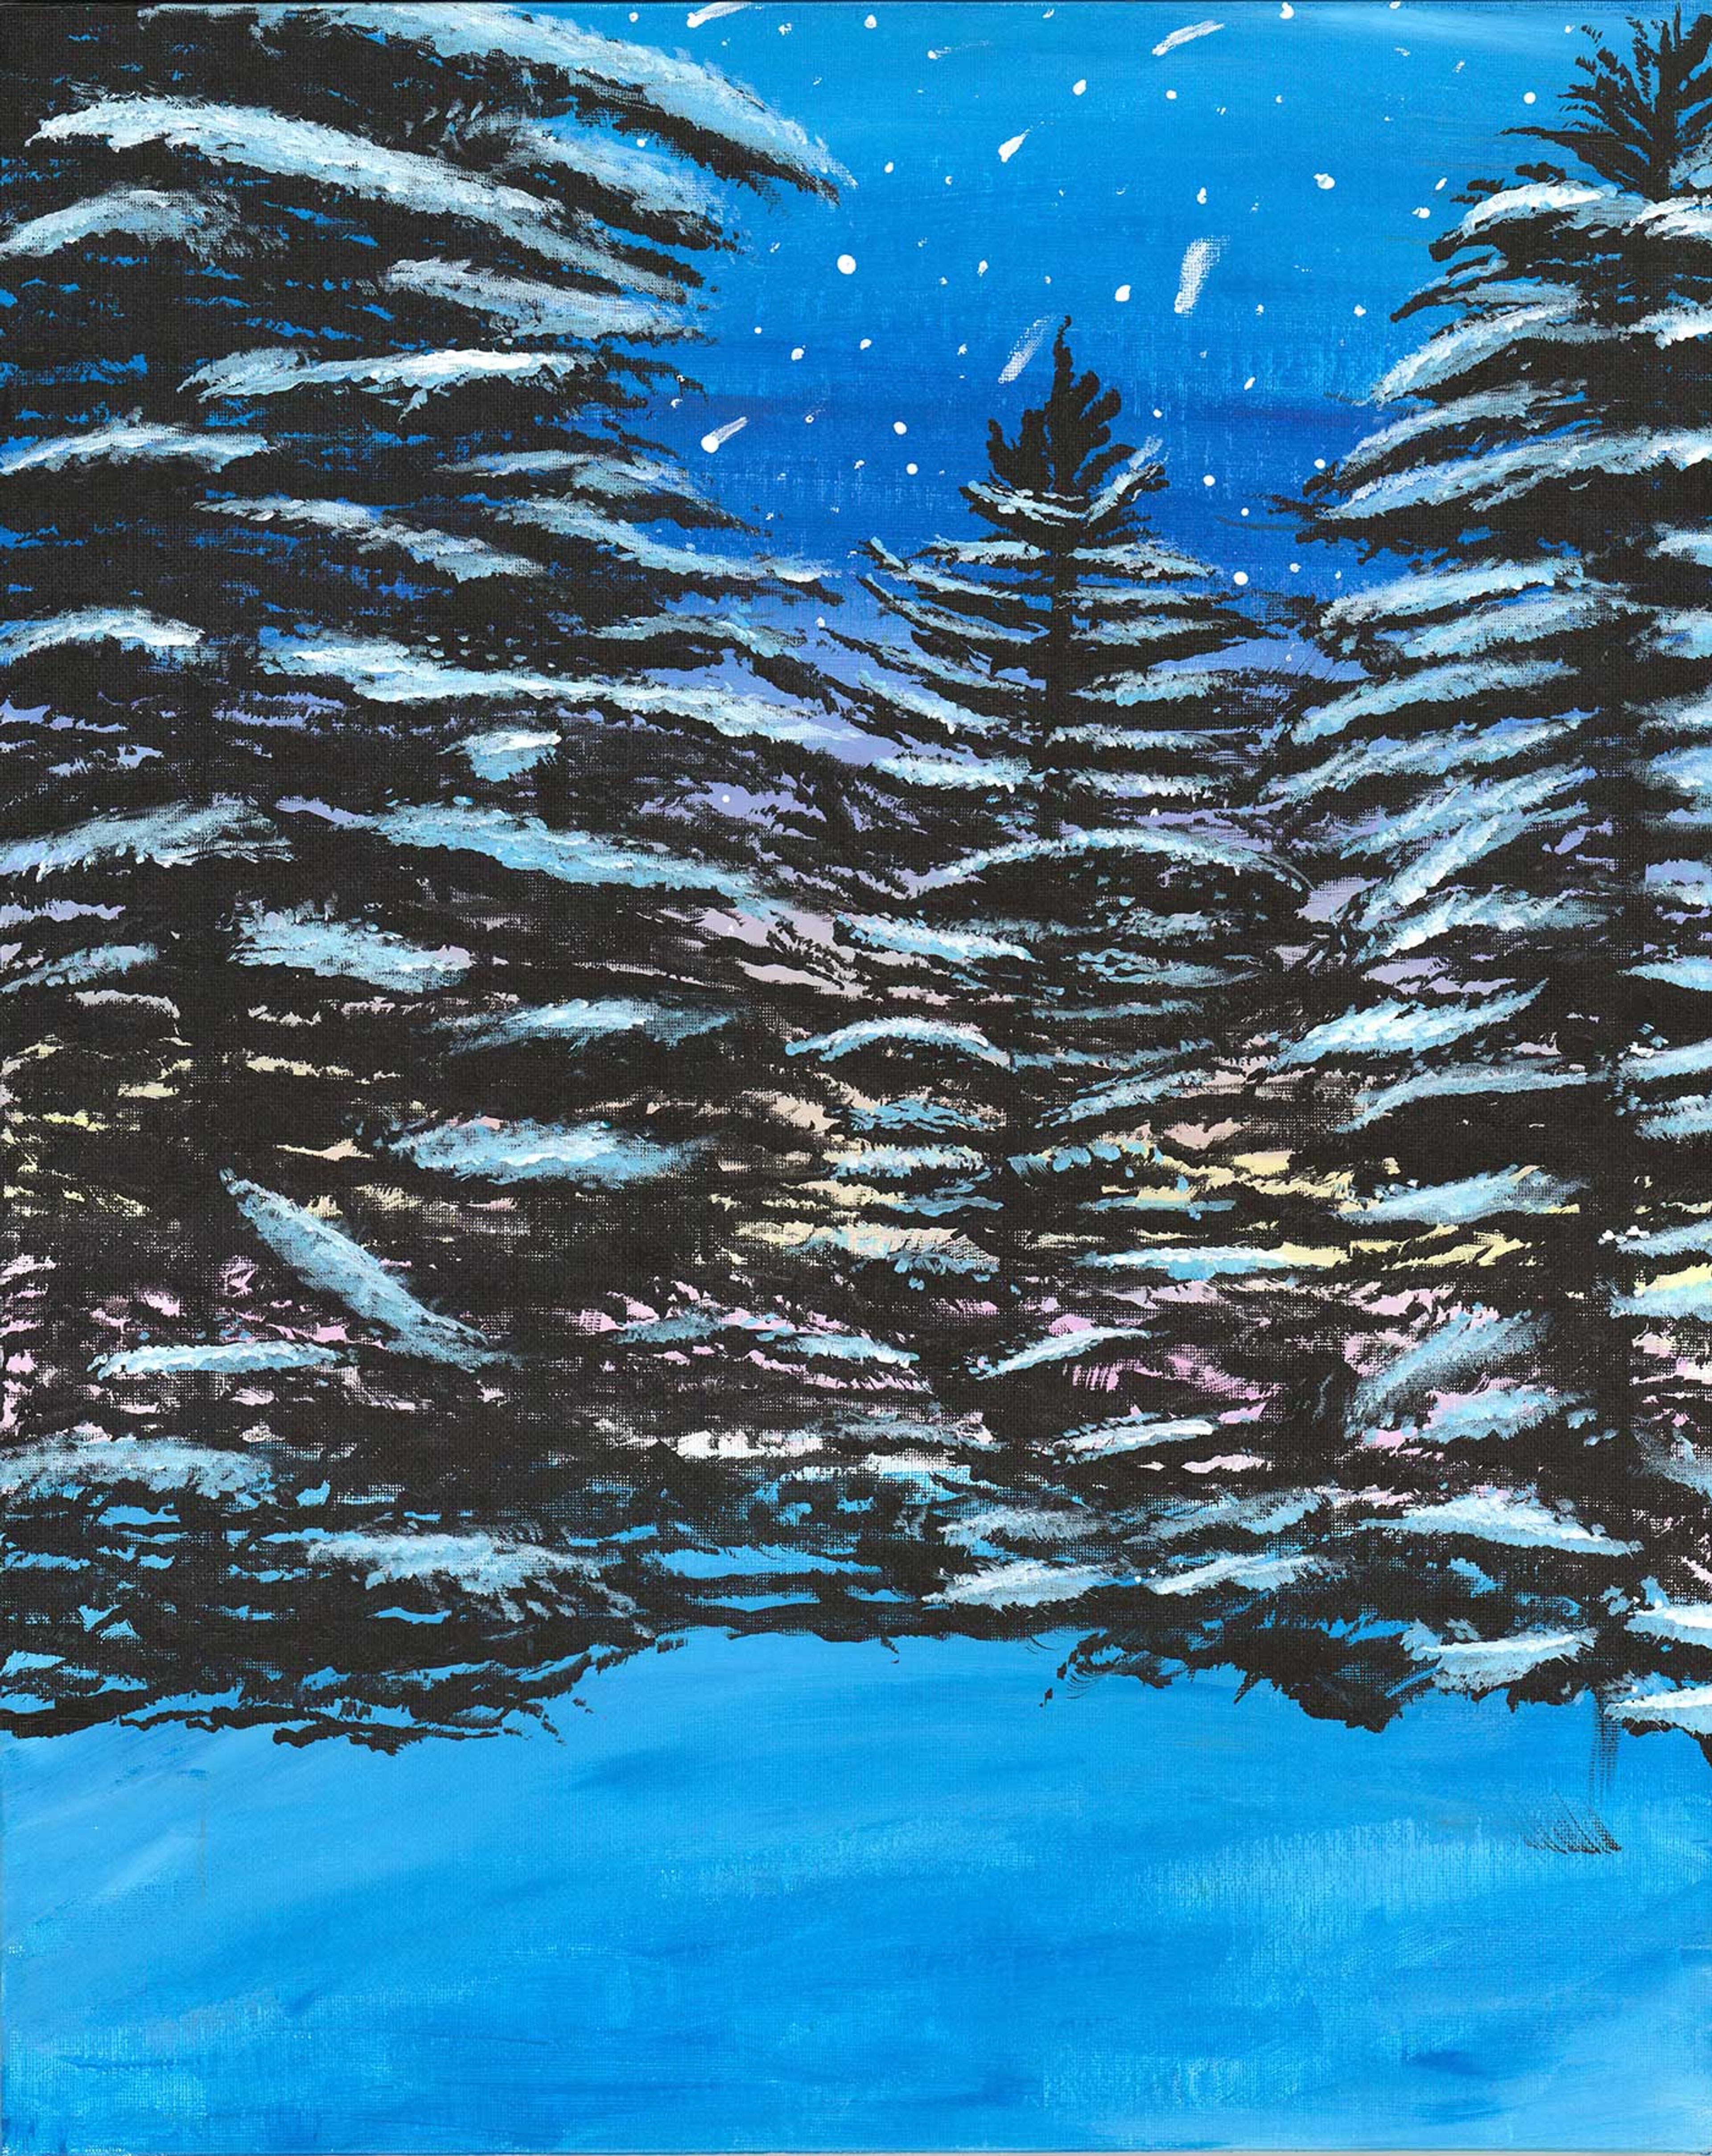  Painting of trees covered in snow with a blue background.